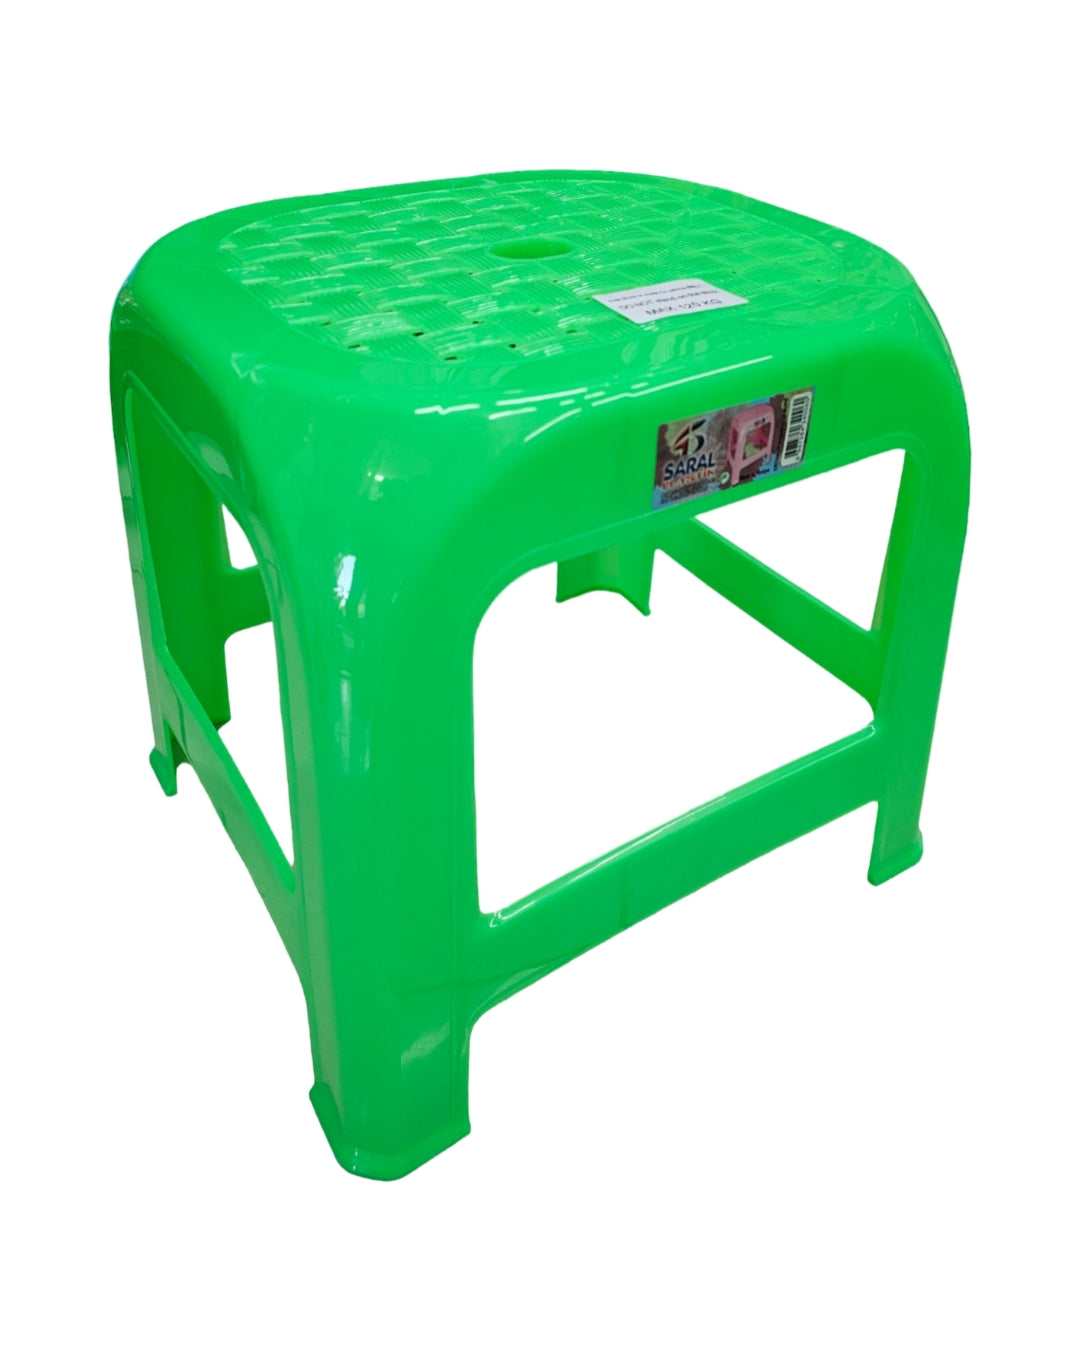 HOBBY MEDIUM STOOL CAN TAKE UP TO 120kg Weight